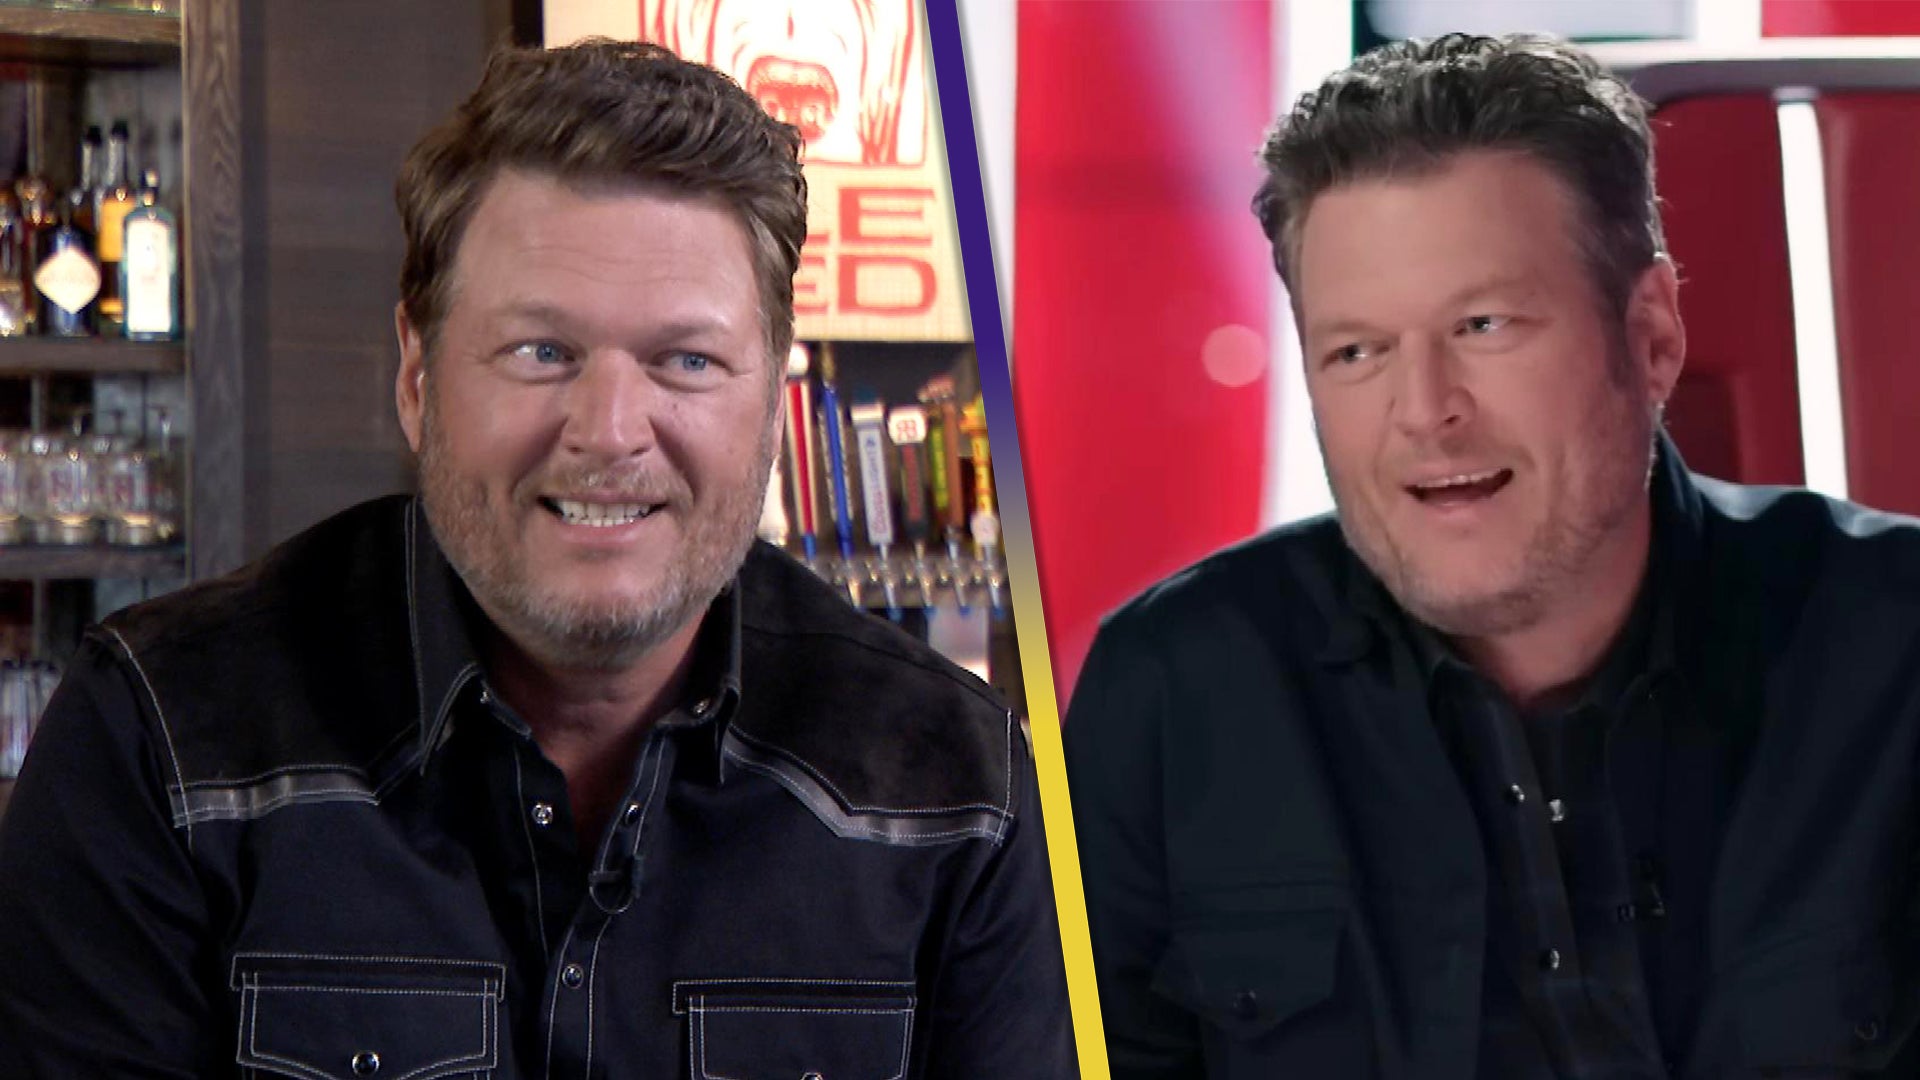 Blake Shelton on If He’ll Ever Return to 'The Voice' and How He Feels Since His Exit 